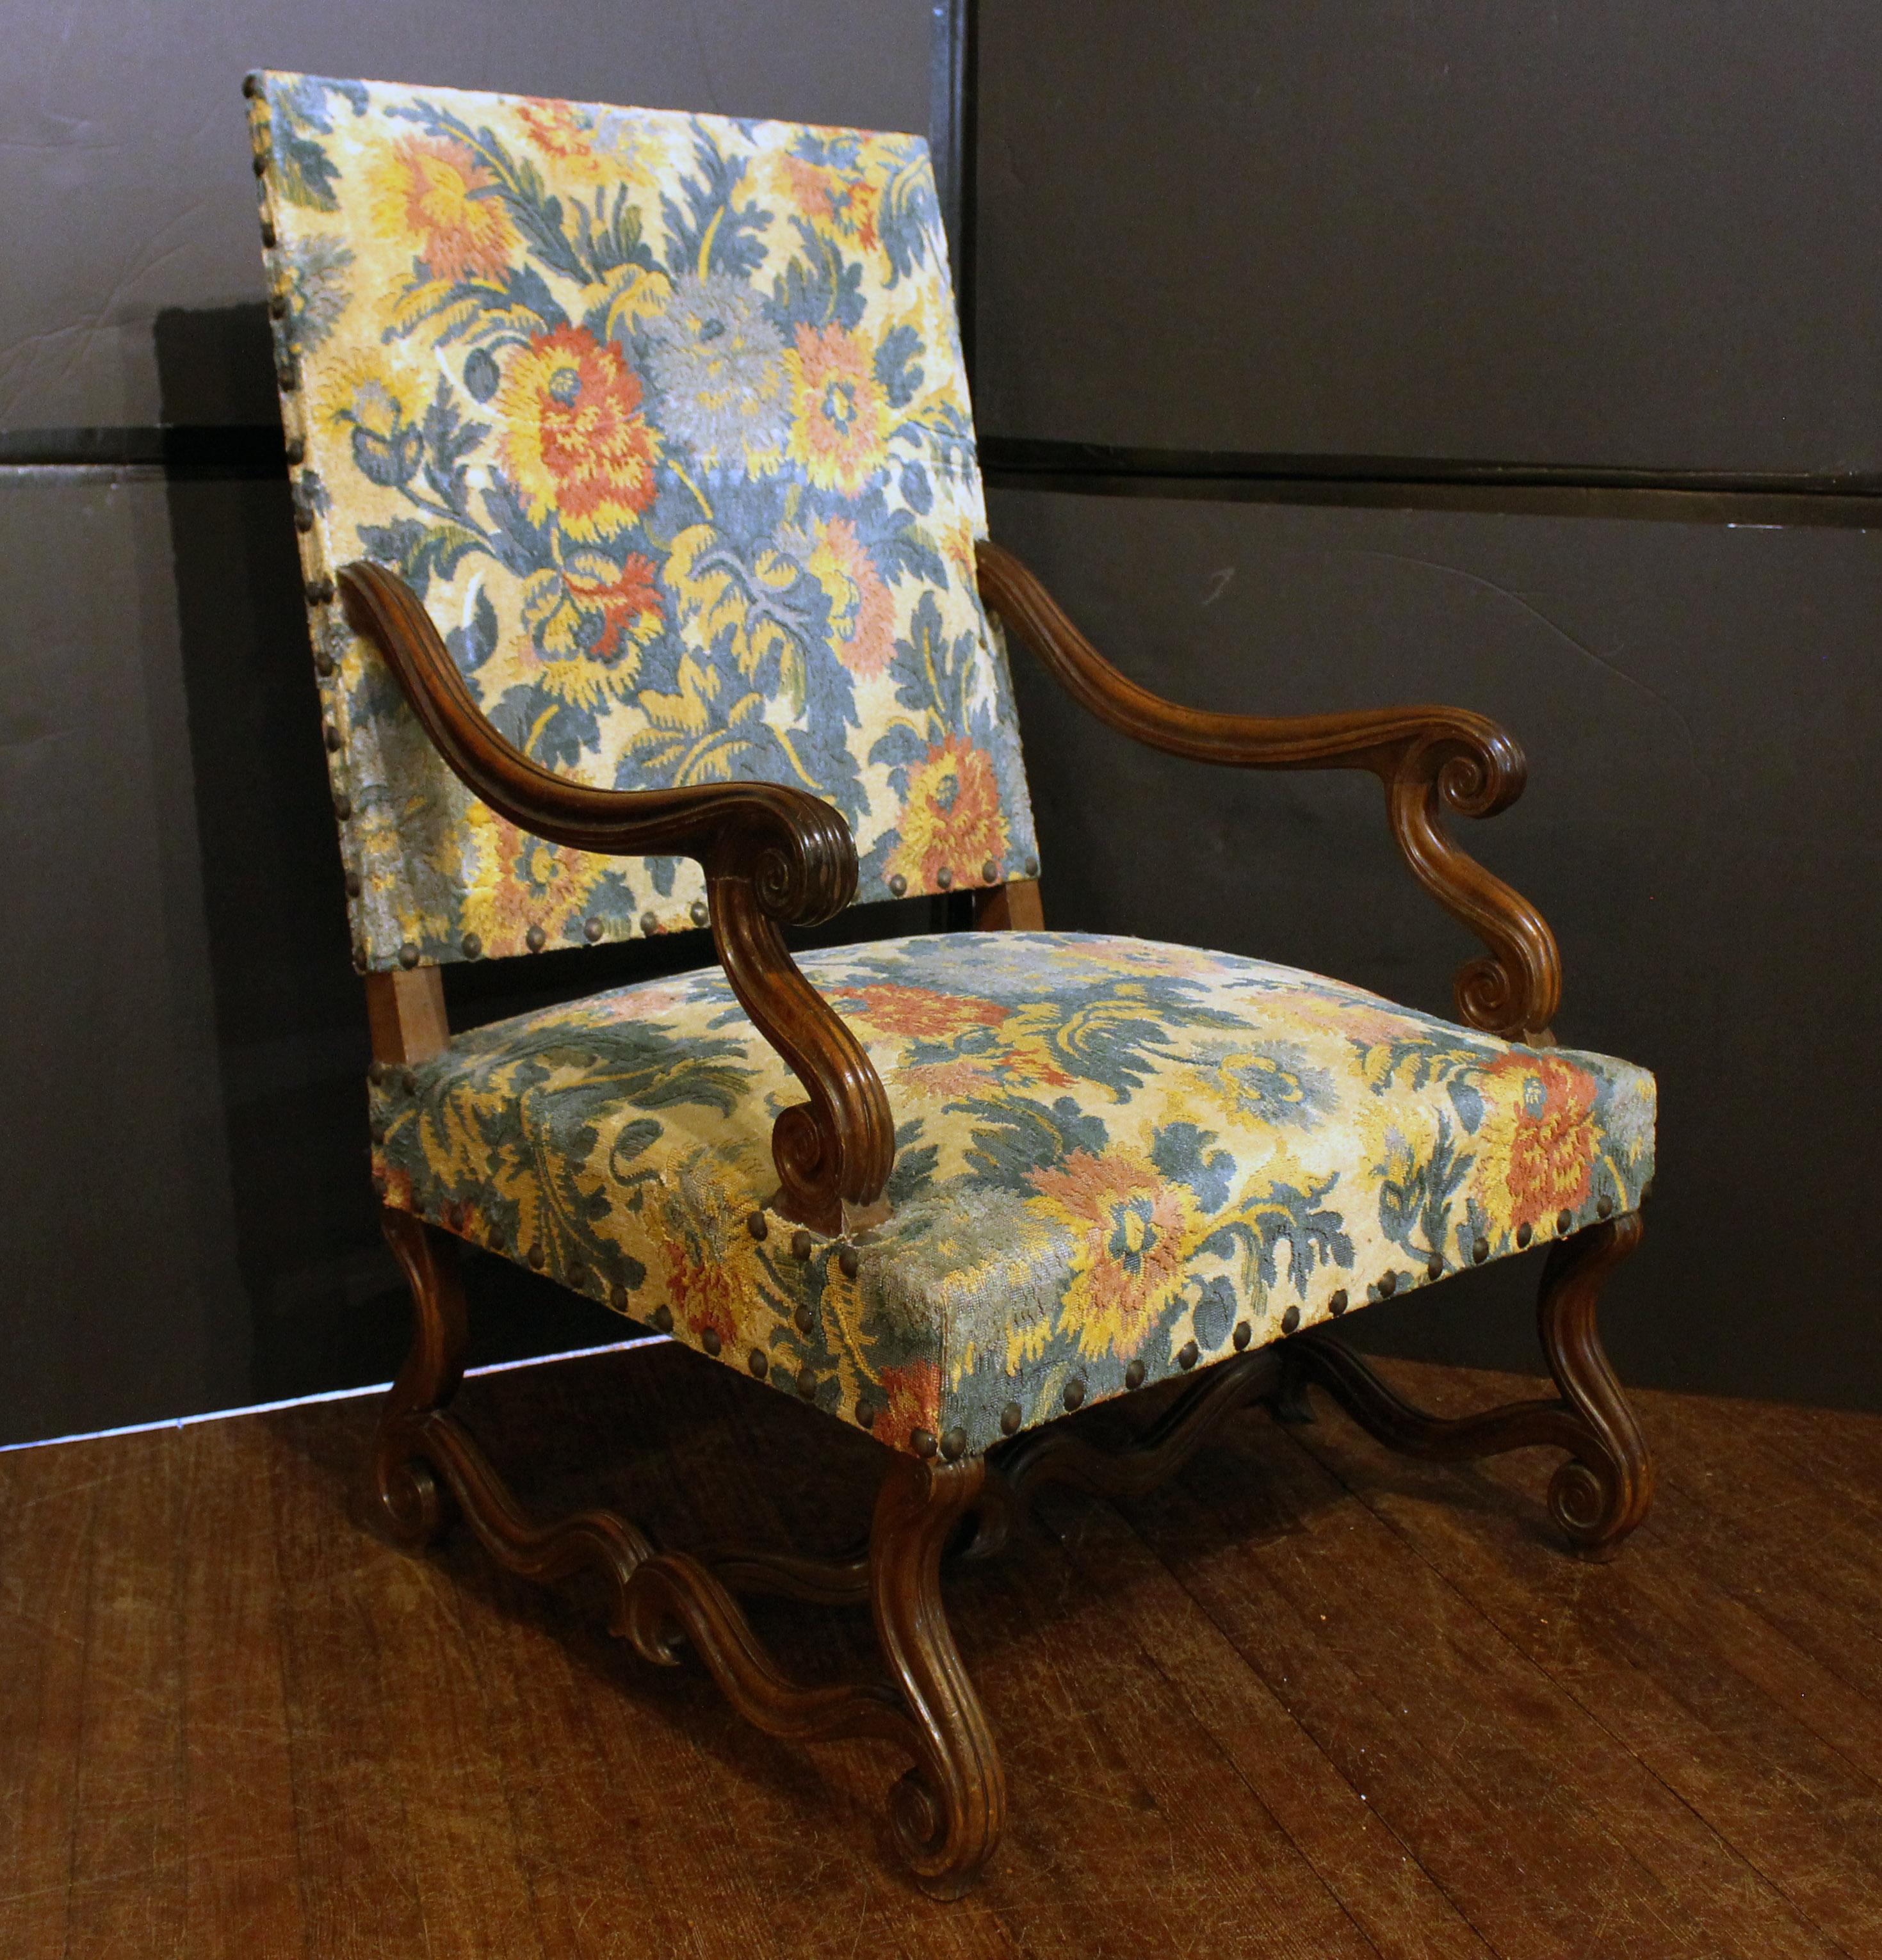 Circa 1870 French Grand Scale Regence Style Fauteuil In Good Condition For Sale In Chapel Hill, NC